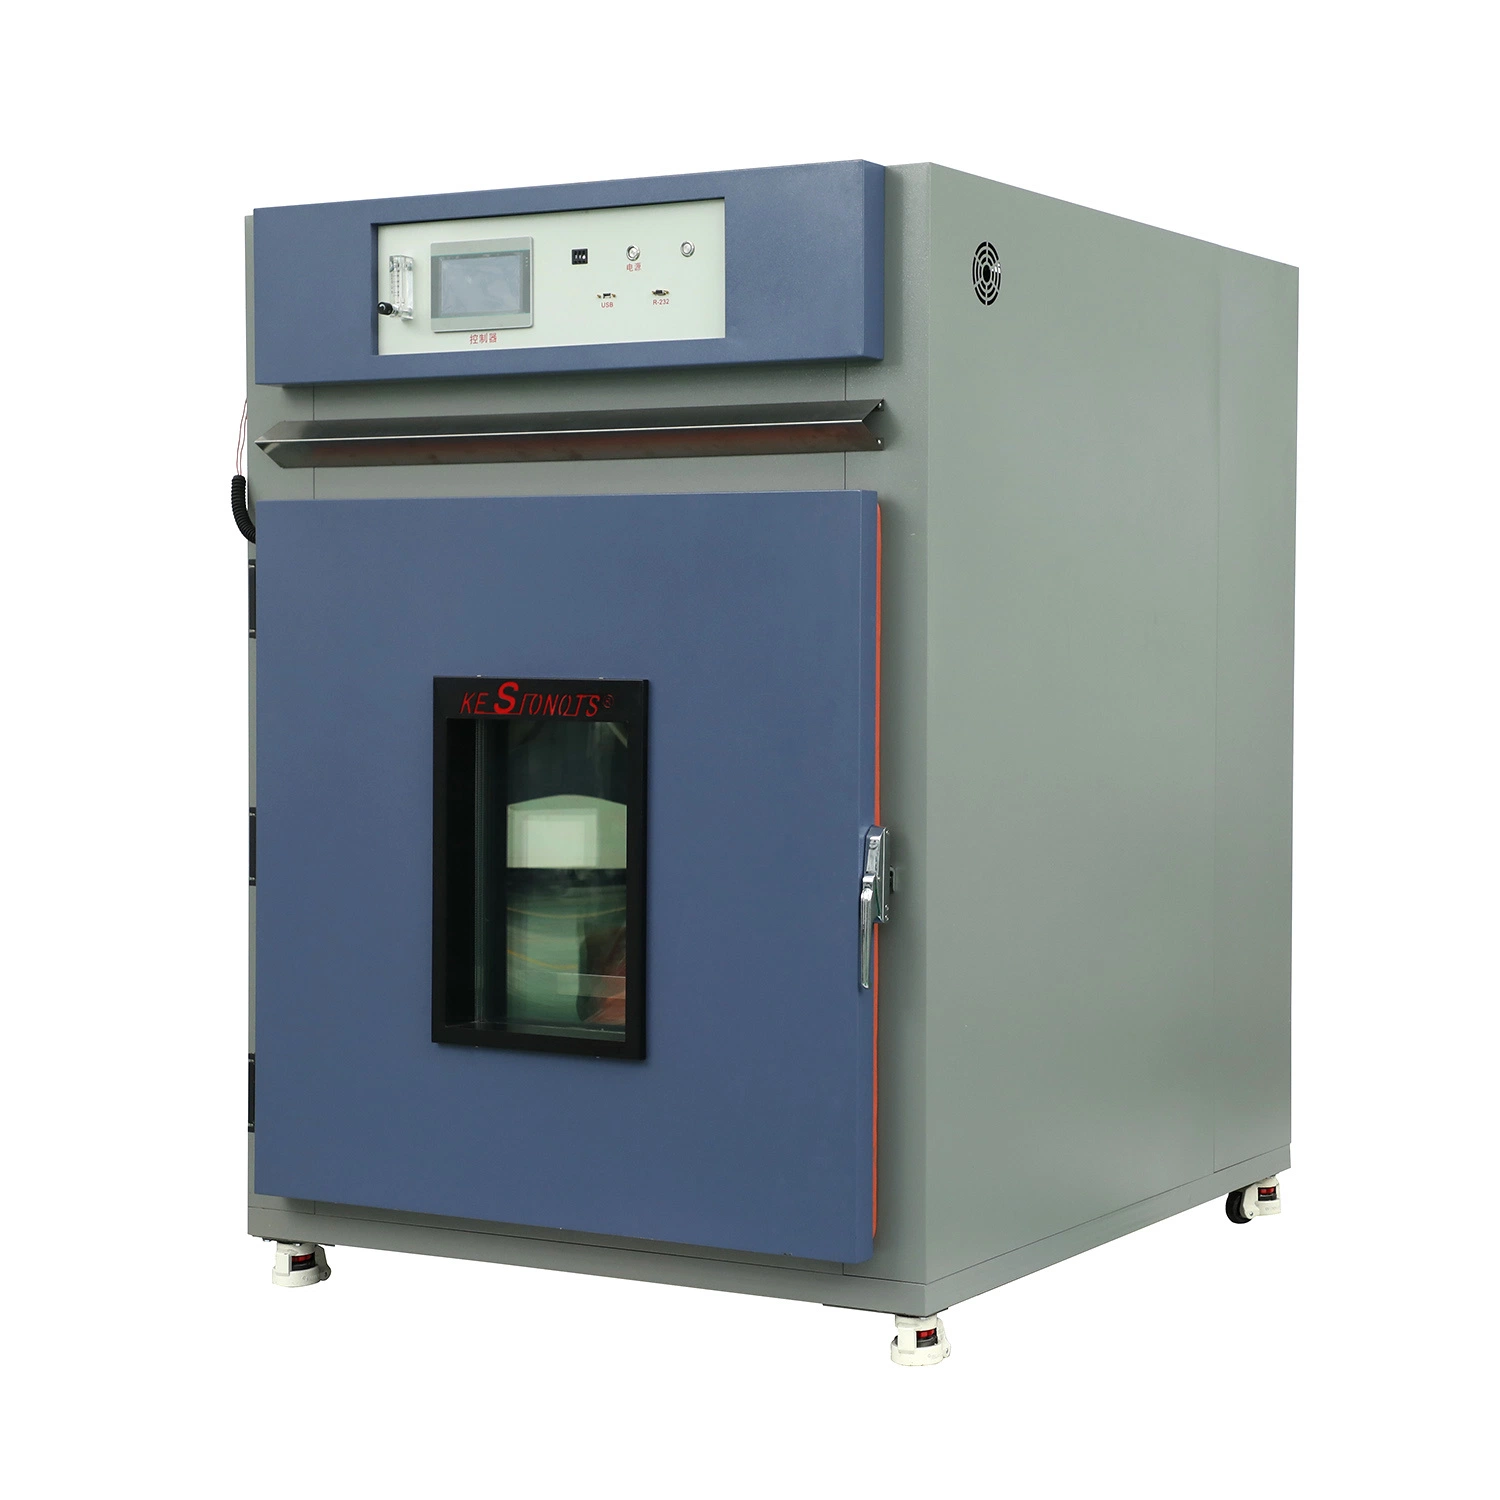 Nitrogen-Filled High-Temperature Oven Baking Various Aging Testers/Testing Equipment/Test Chamber/Test Machinr High-Temperature Ovens